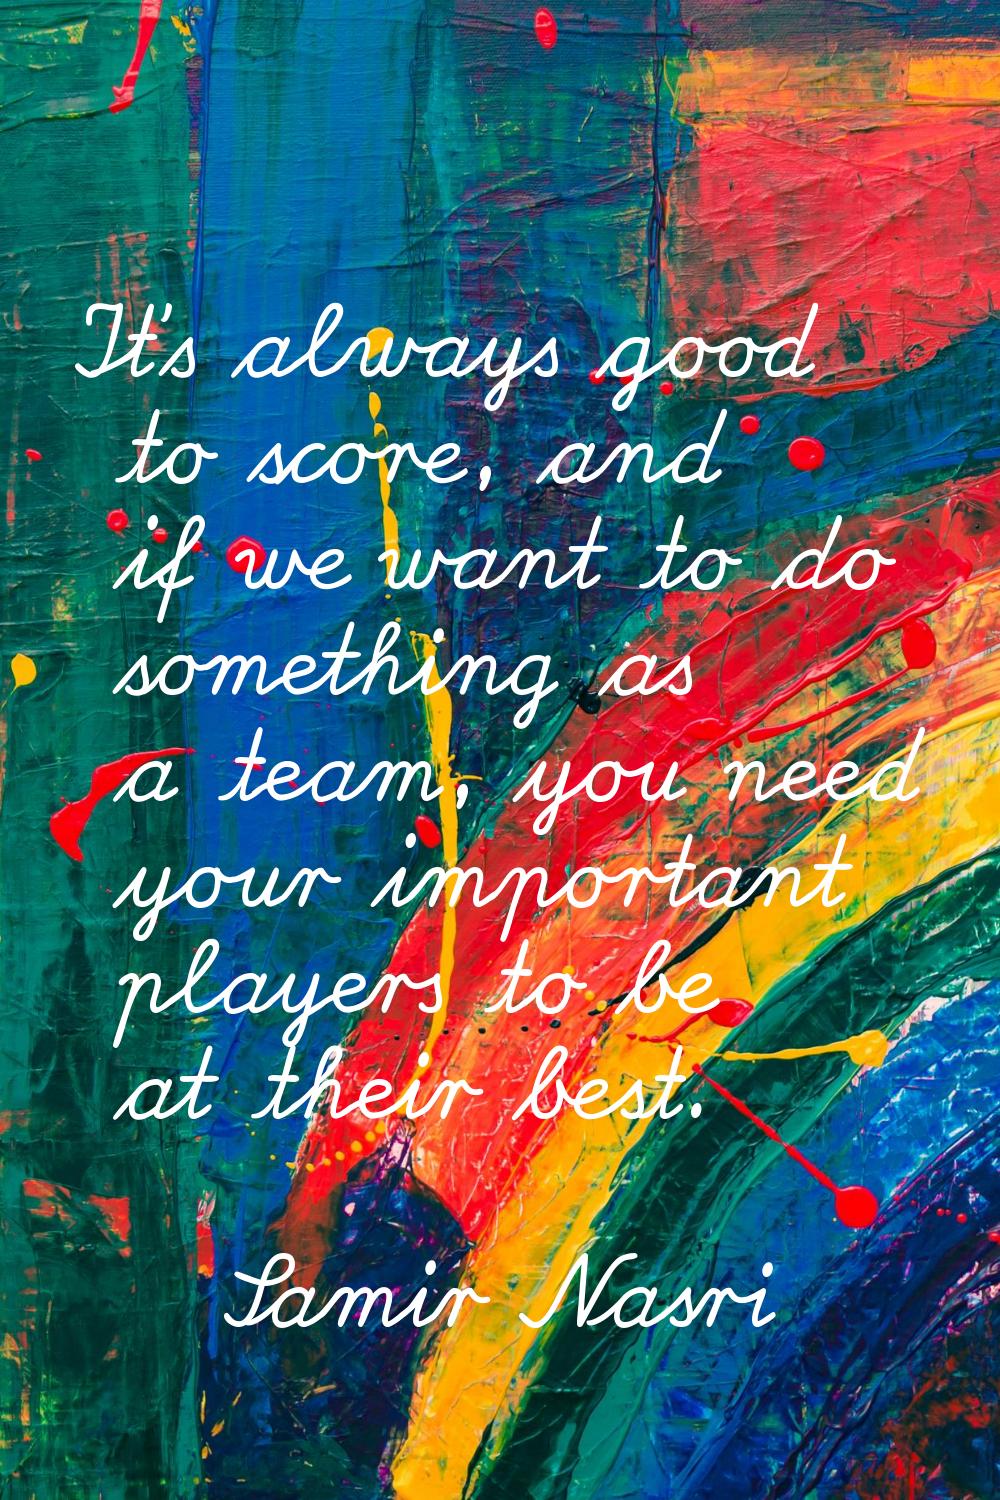 It's always good to score, and if we want to do something as a team, you need your important player